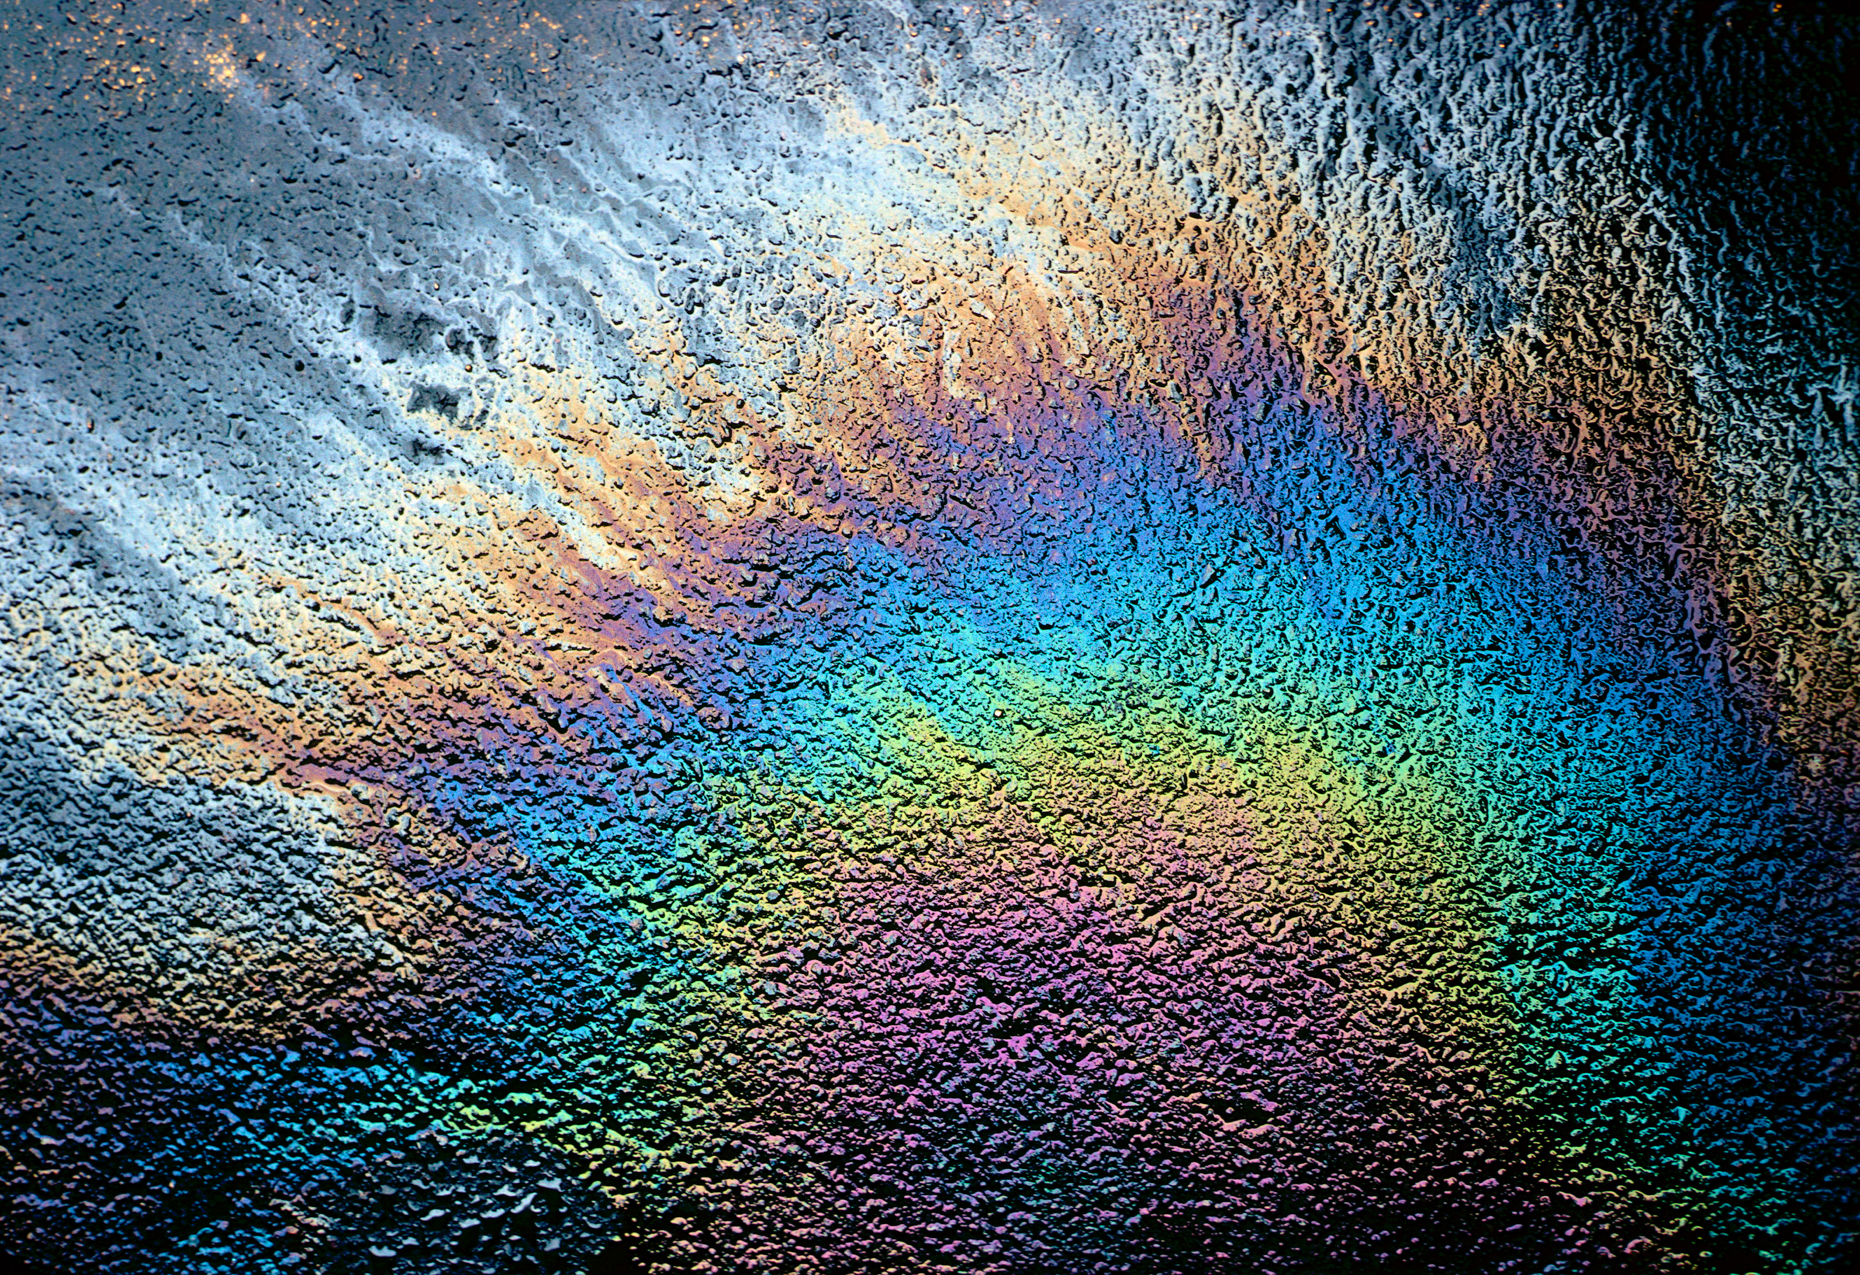 Spilled motor oil on blacktop parking lot creates rainbow of colors